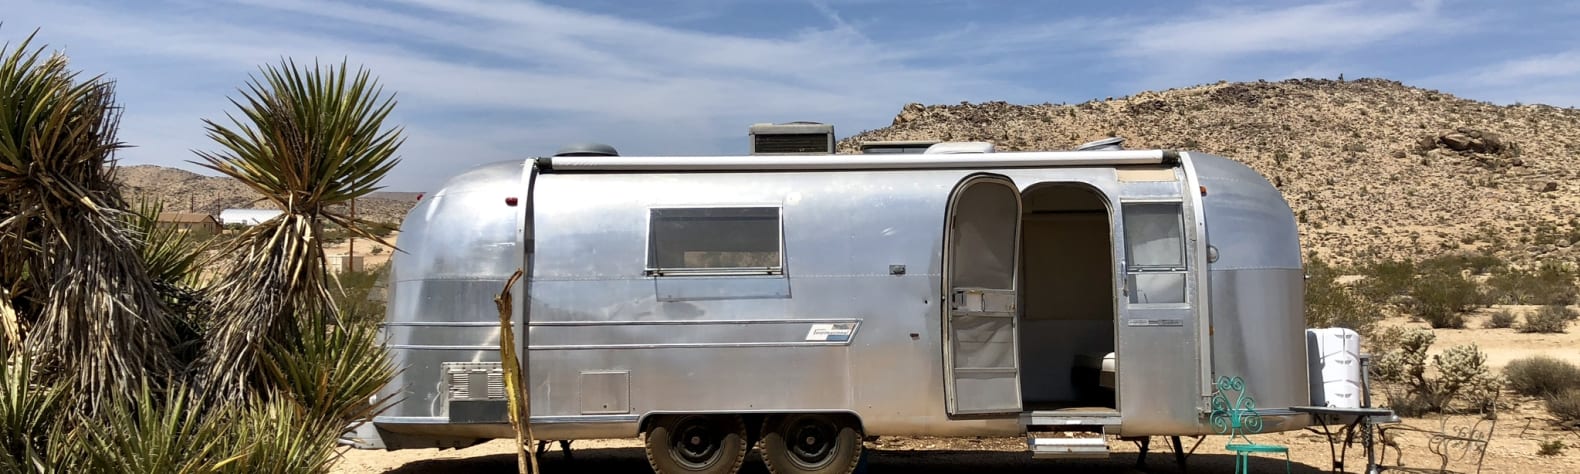 Airstream w/ Amazing Views In JT